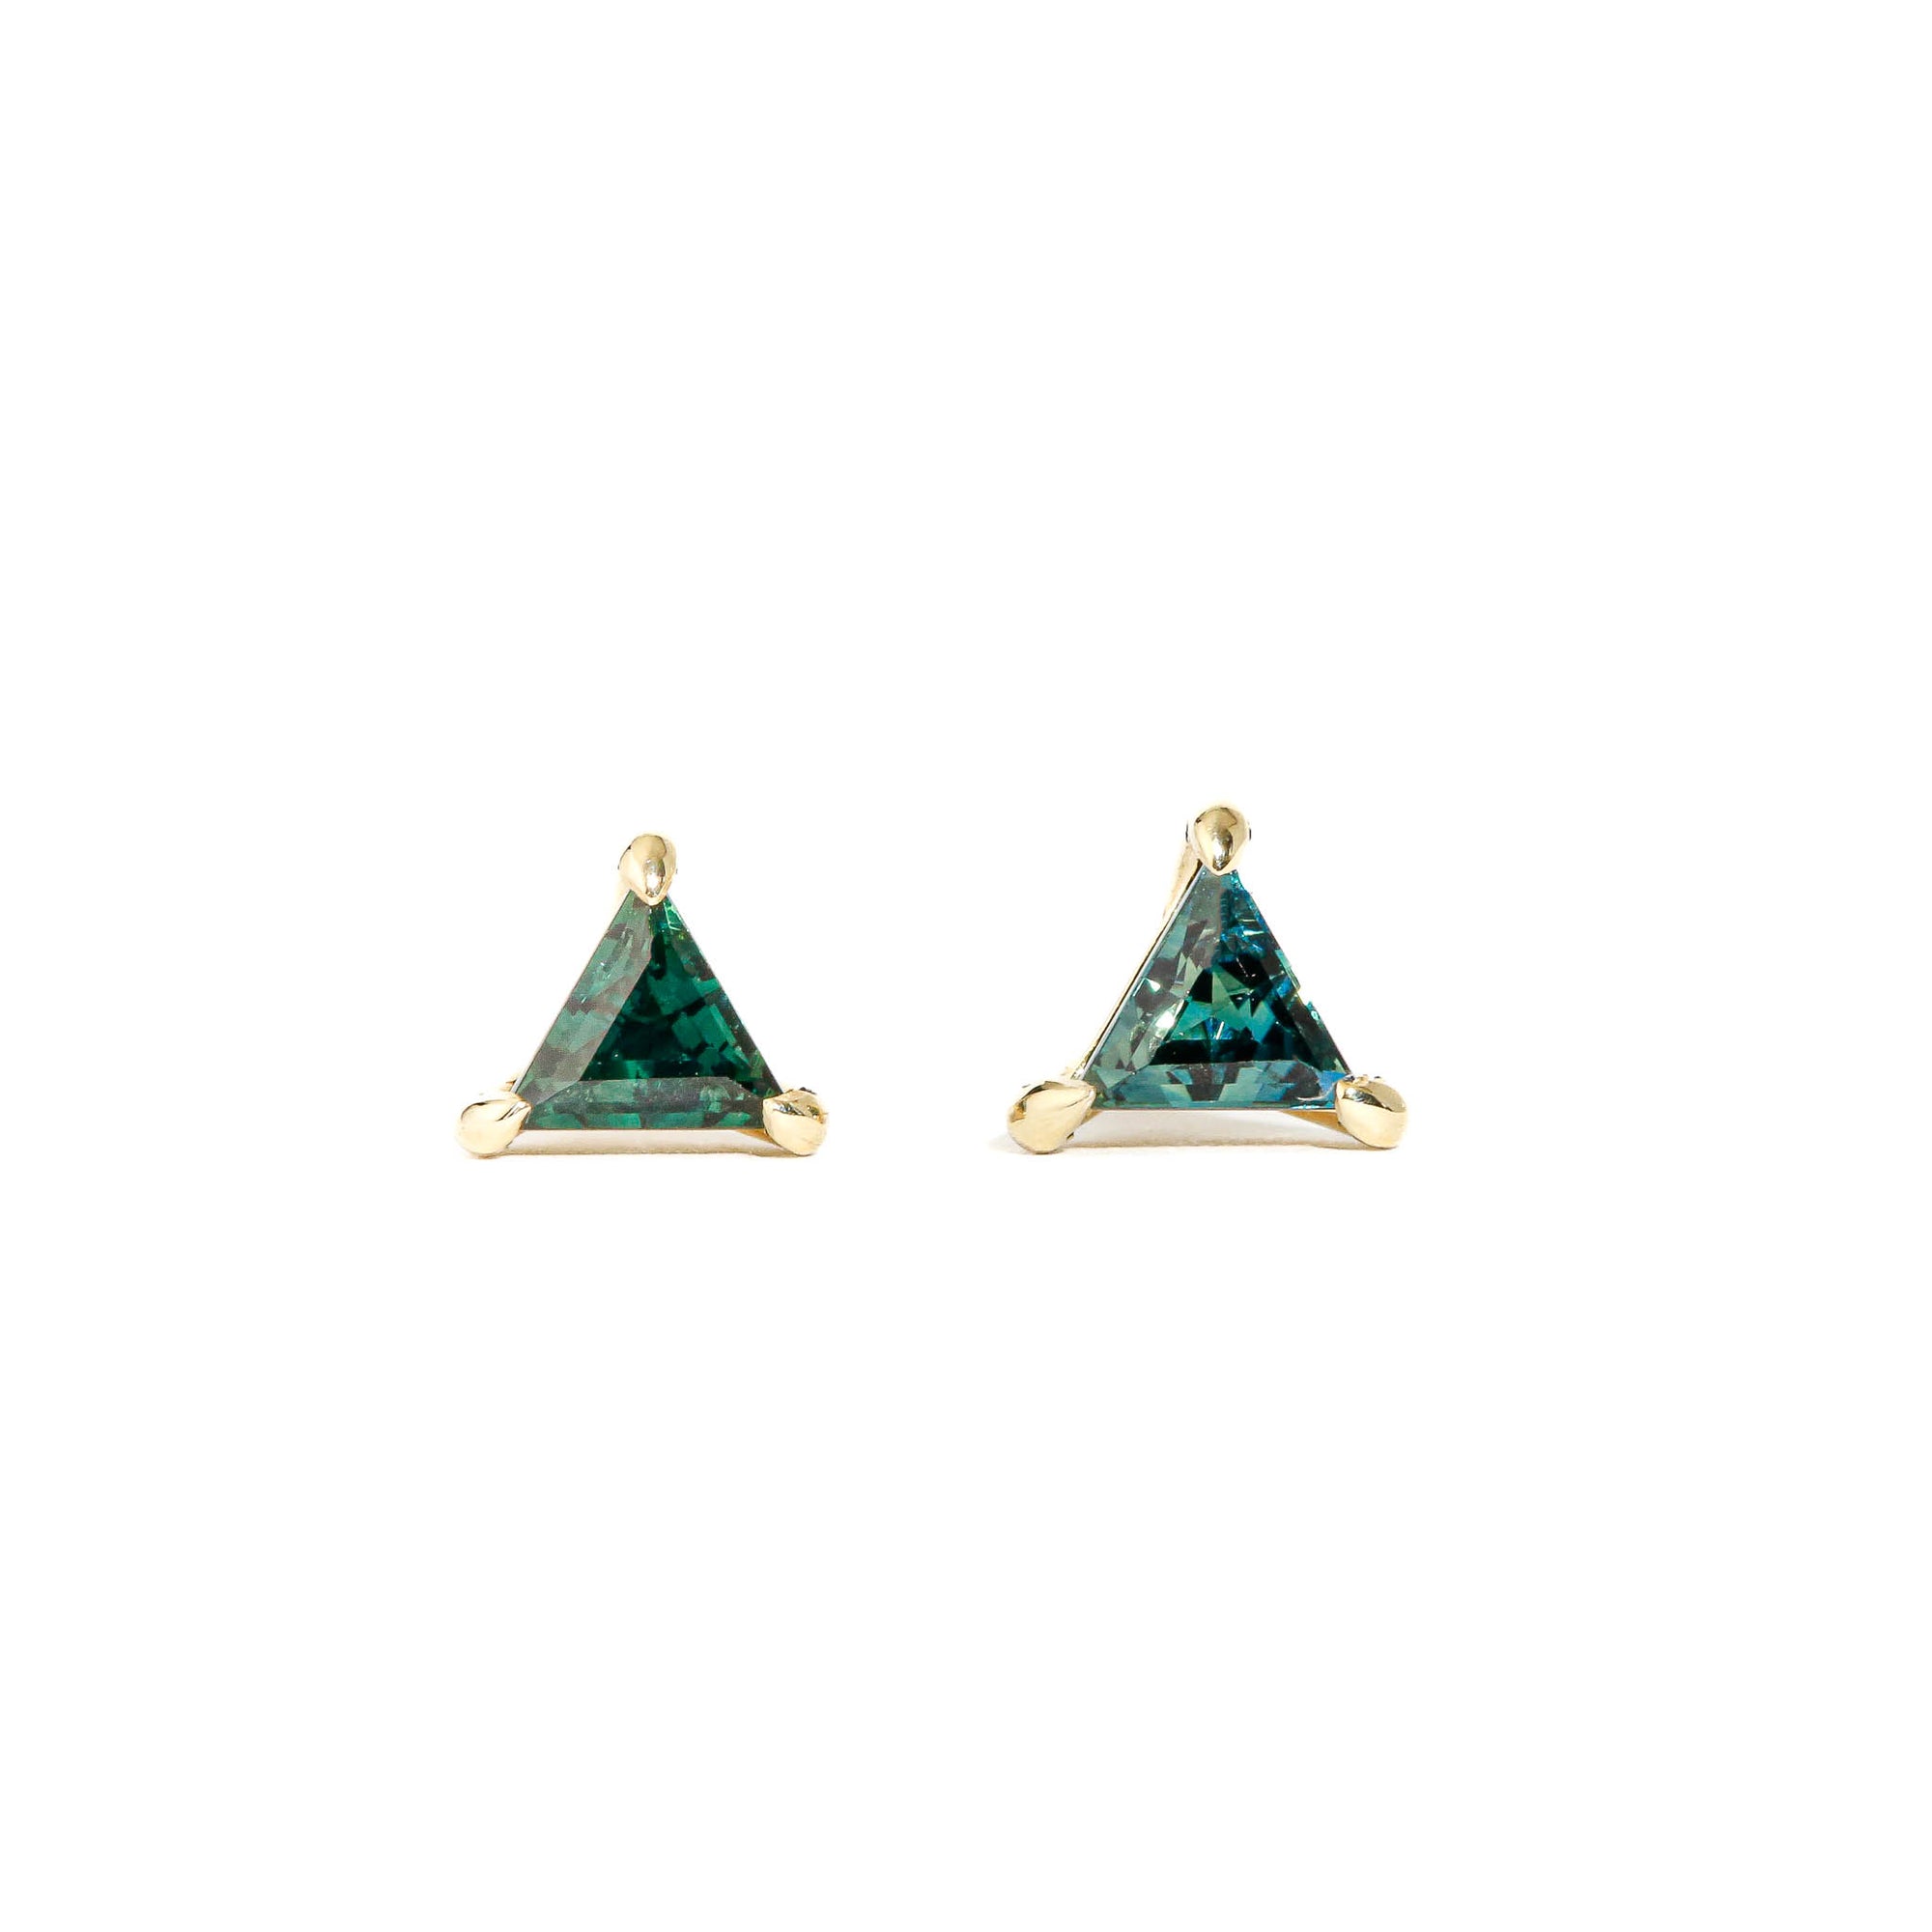 9 carat yellow gold earrings, each featuring one trilliant cut, ethically sourced Australian teal sapphire. 